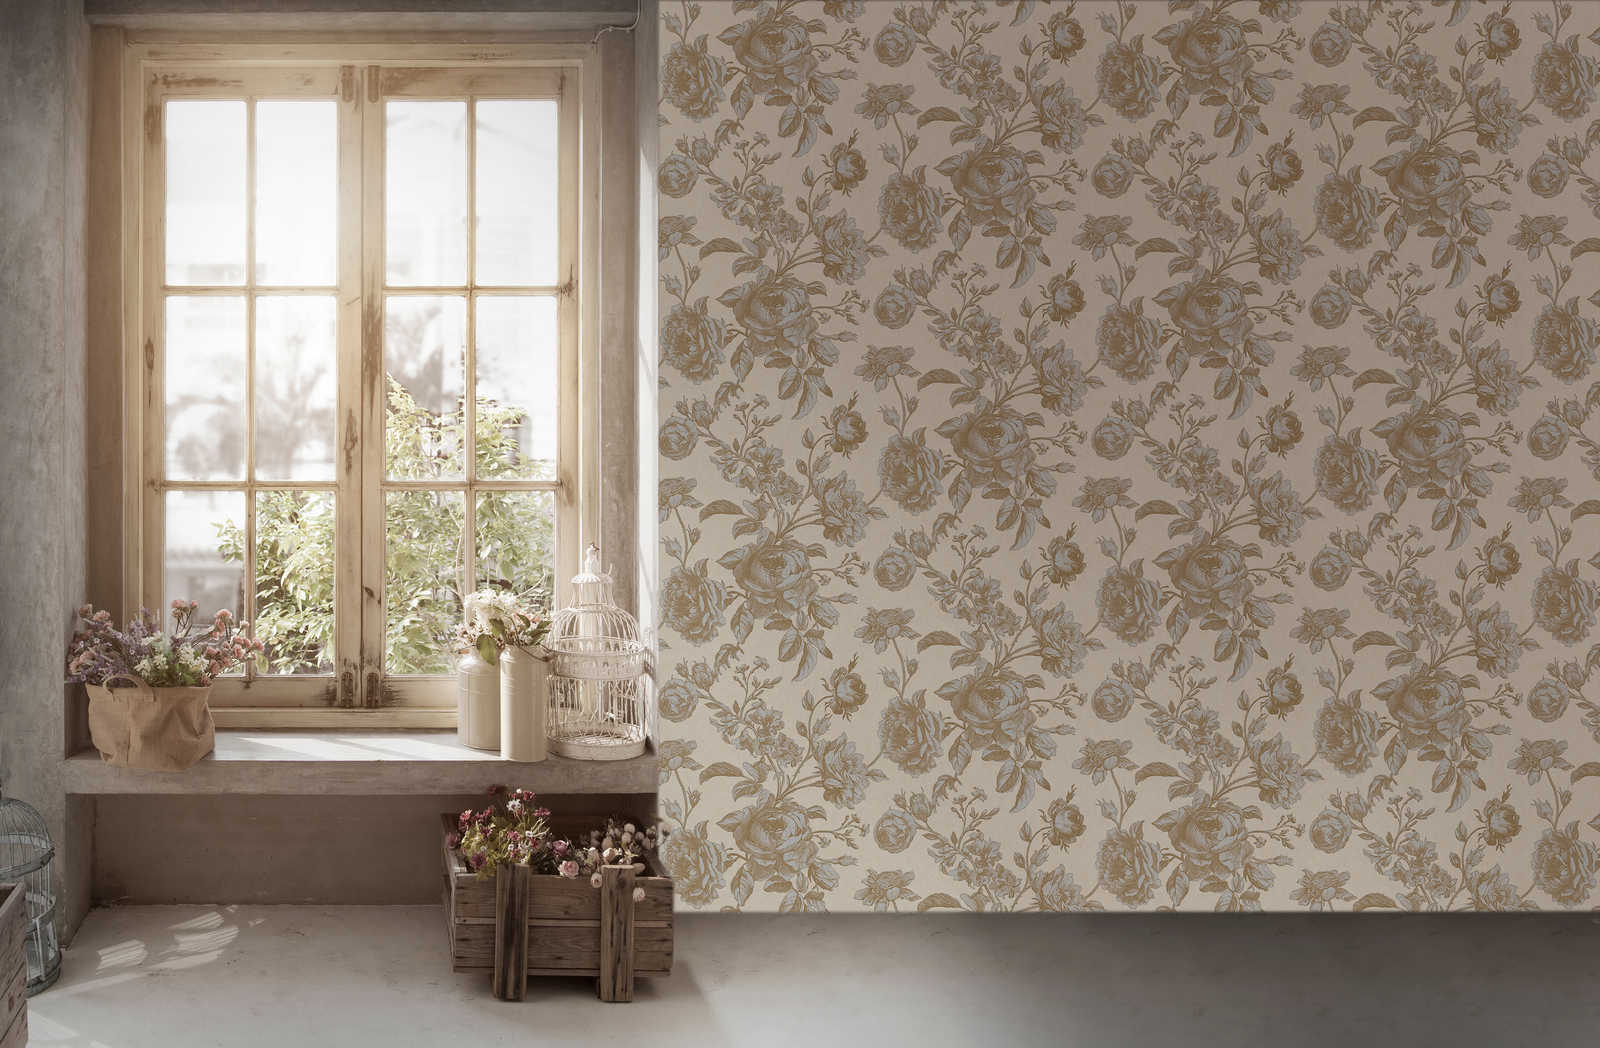             Vintage wallpaper with roses pattern in graphic style - metallic, cream
        